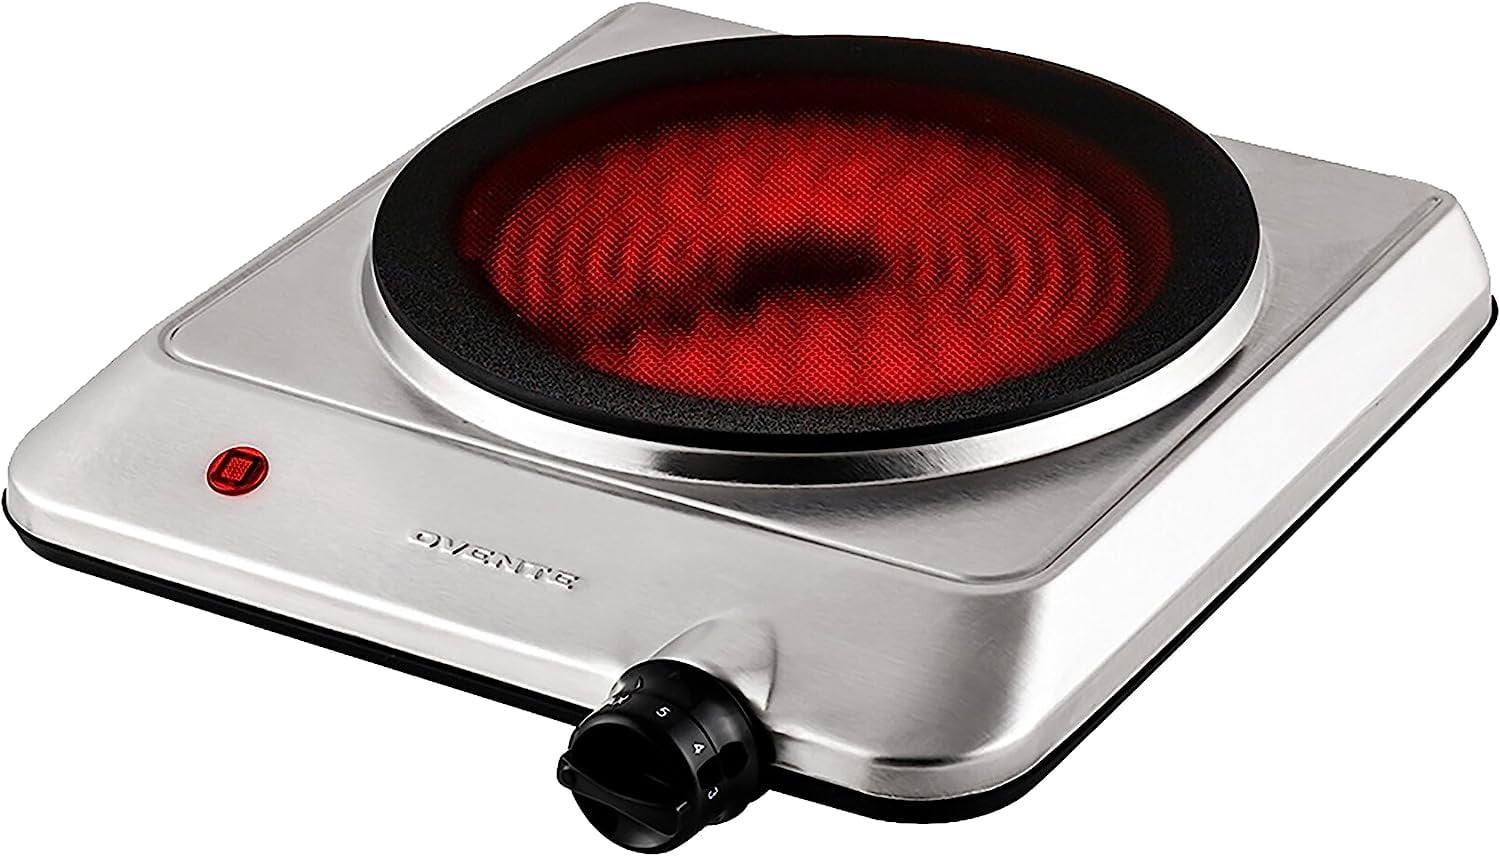 SUNAVO 1500W Hot Plates for Cooking, Electric Single Burner with Handles, 6  Power Levels Stainless Steel Hot Plate